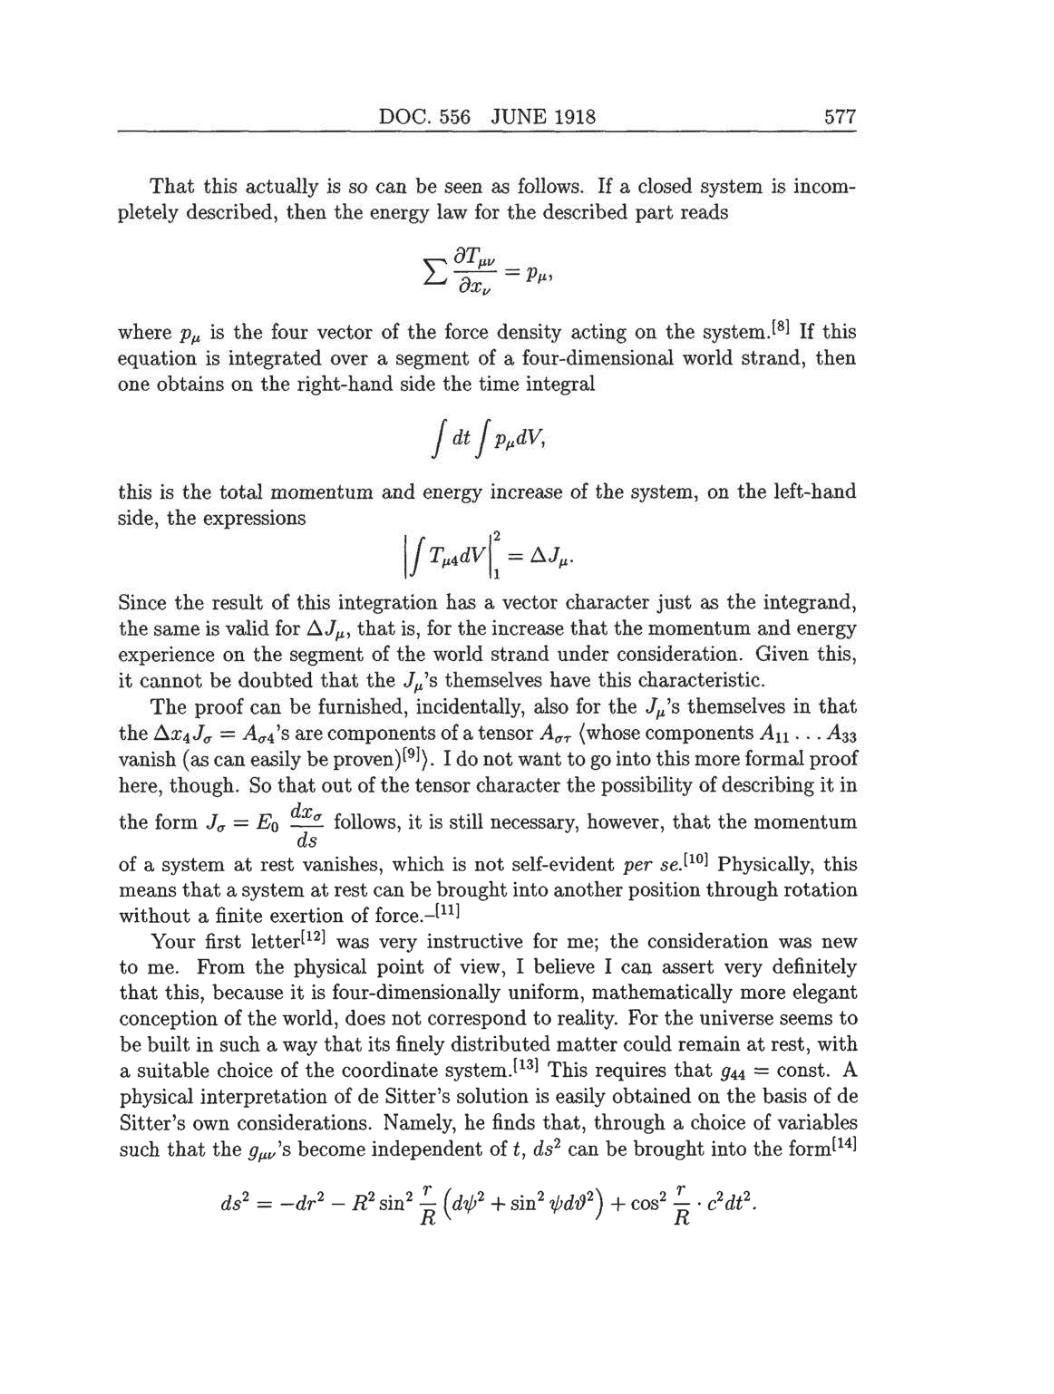 Volume 8: The Berlin Years: Correspondence, 1914-1918 (English translation supplement) page 577